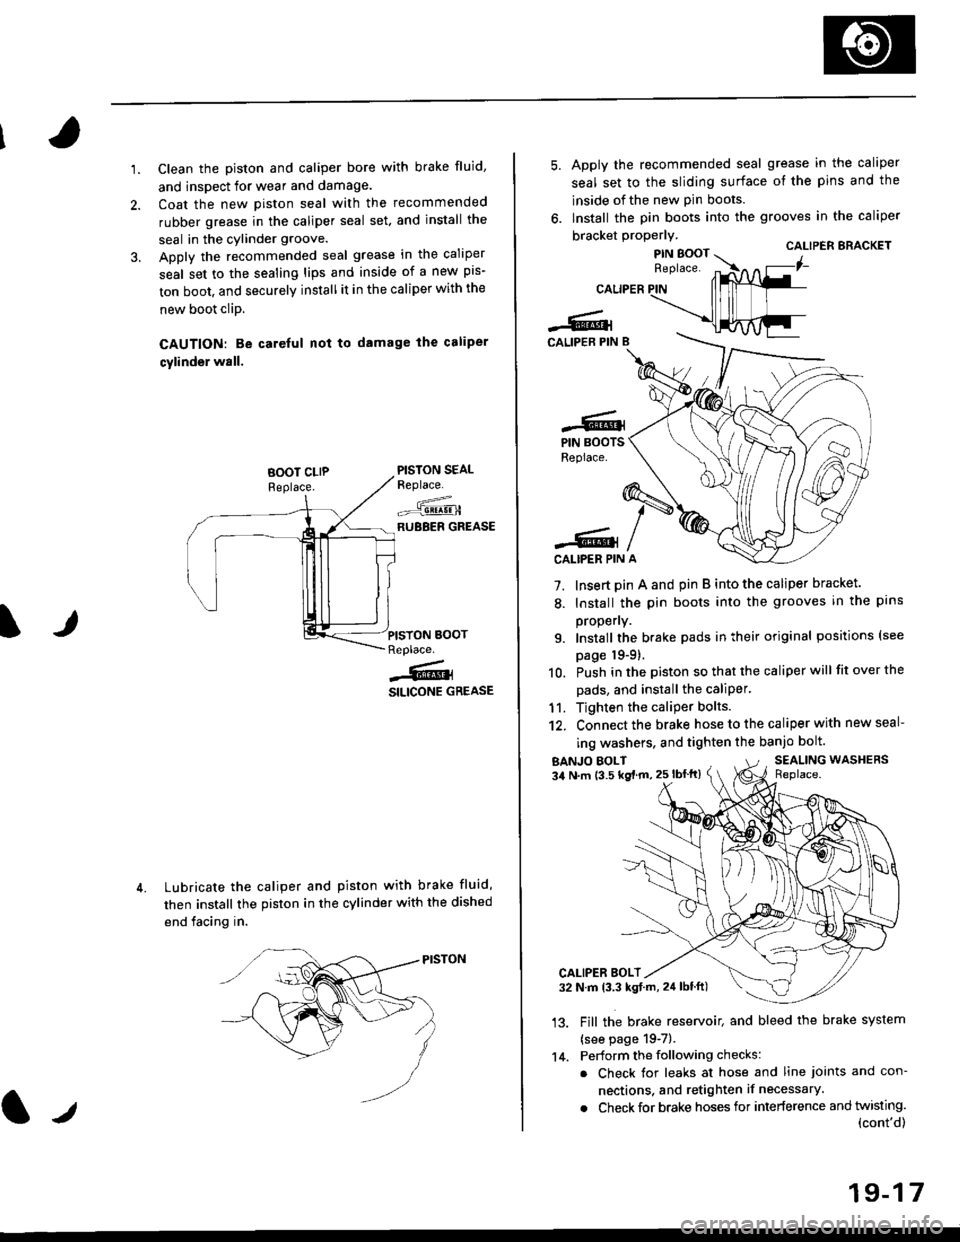 HONDA CIVIC 1997 6.G Owners Manual 1.Clean the piston and caliper bore with brake fluid,
and inspect for wear and damage.
Coat the new piston seal with the recommended
rubber grease in the caliper seal set. and install the
seal in the